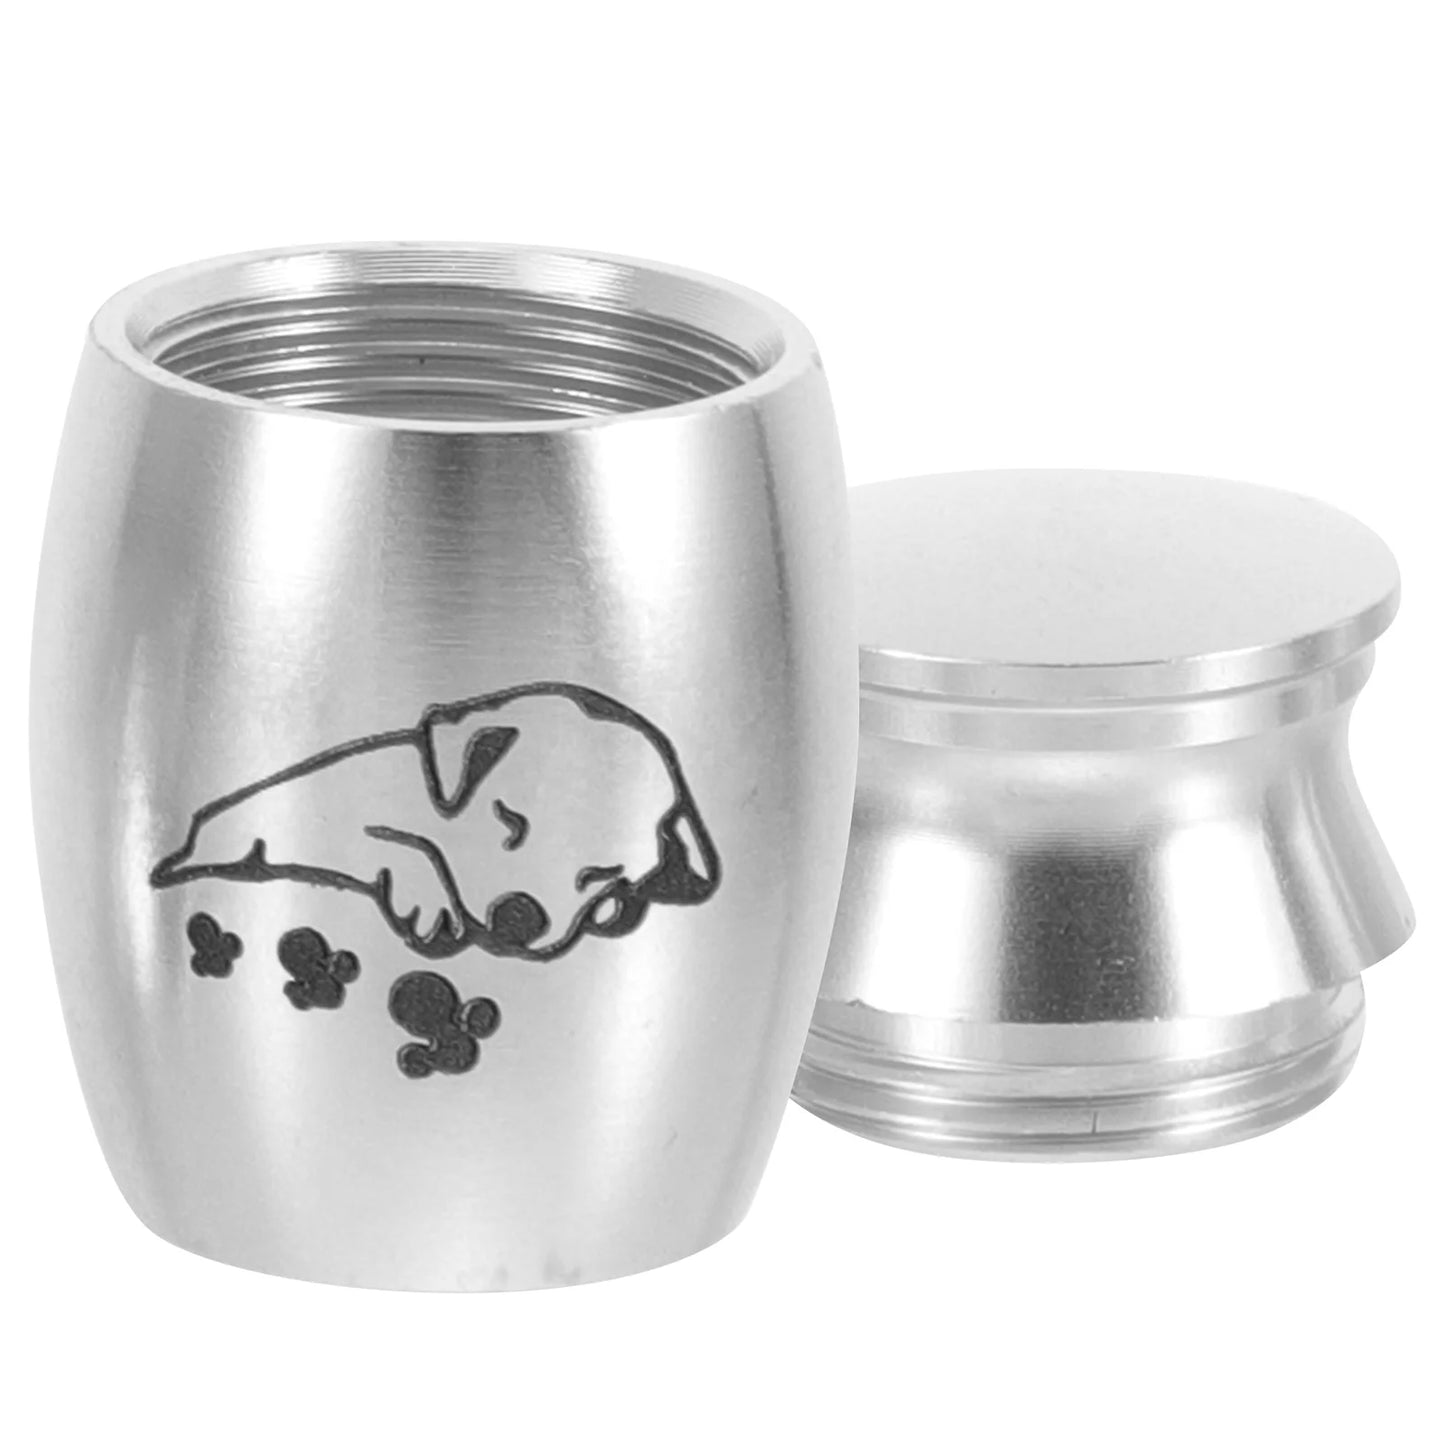 Puppy Snuggles Paws - Mini Cremation Urn For Ashes Keepsake